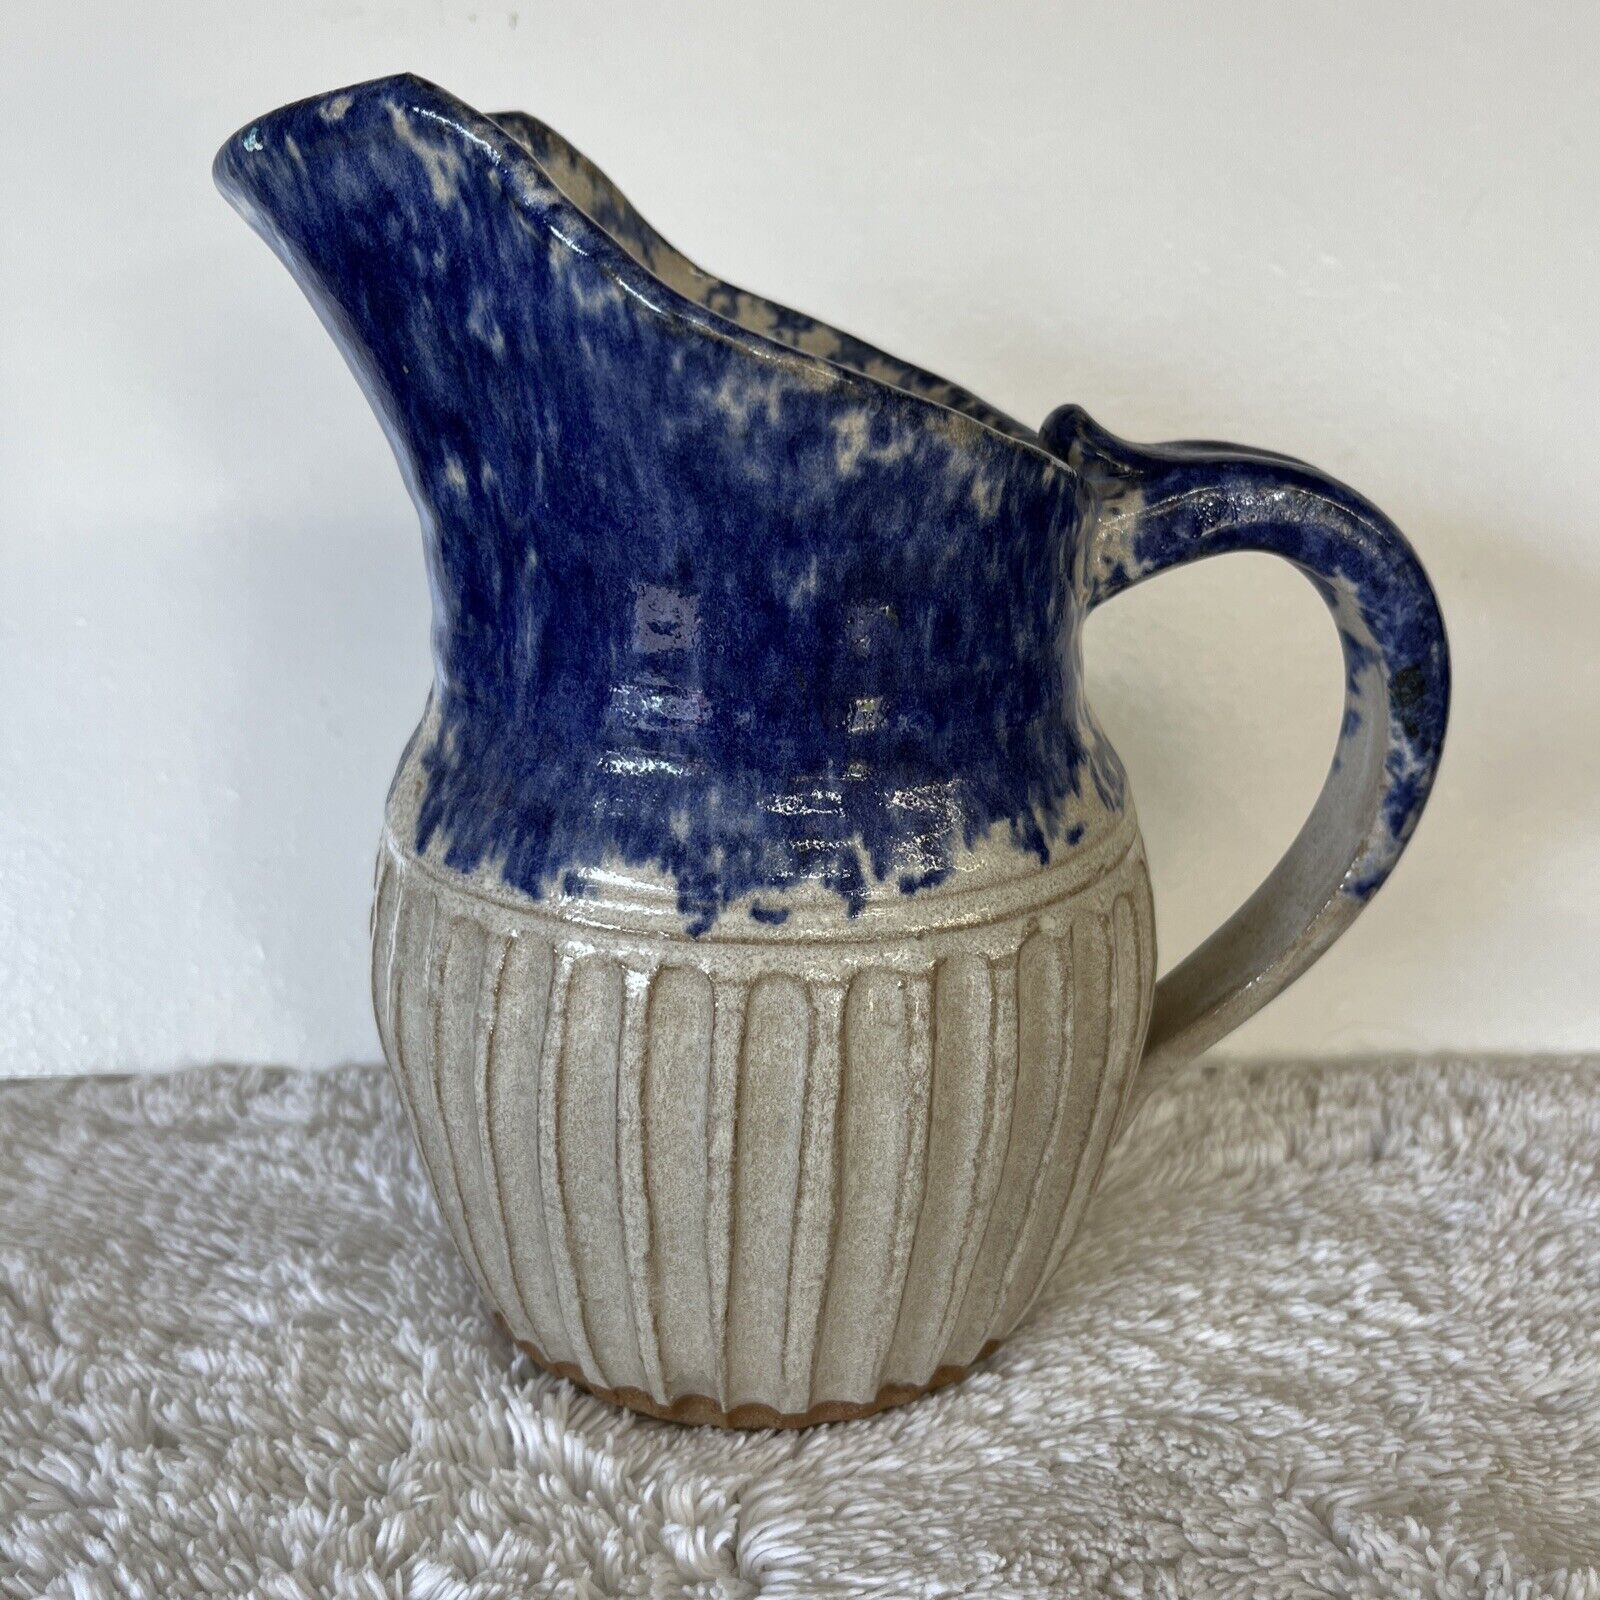 Vintage Pottery Pitcher, Blue/Gray , 7.5 Inches, Great Condition